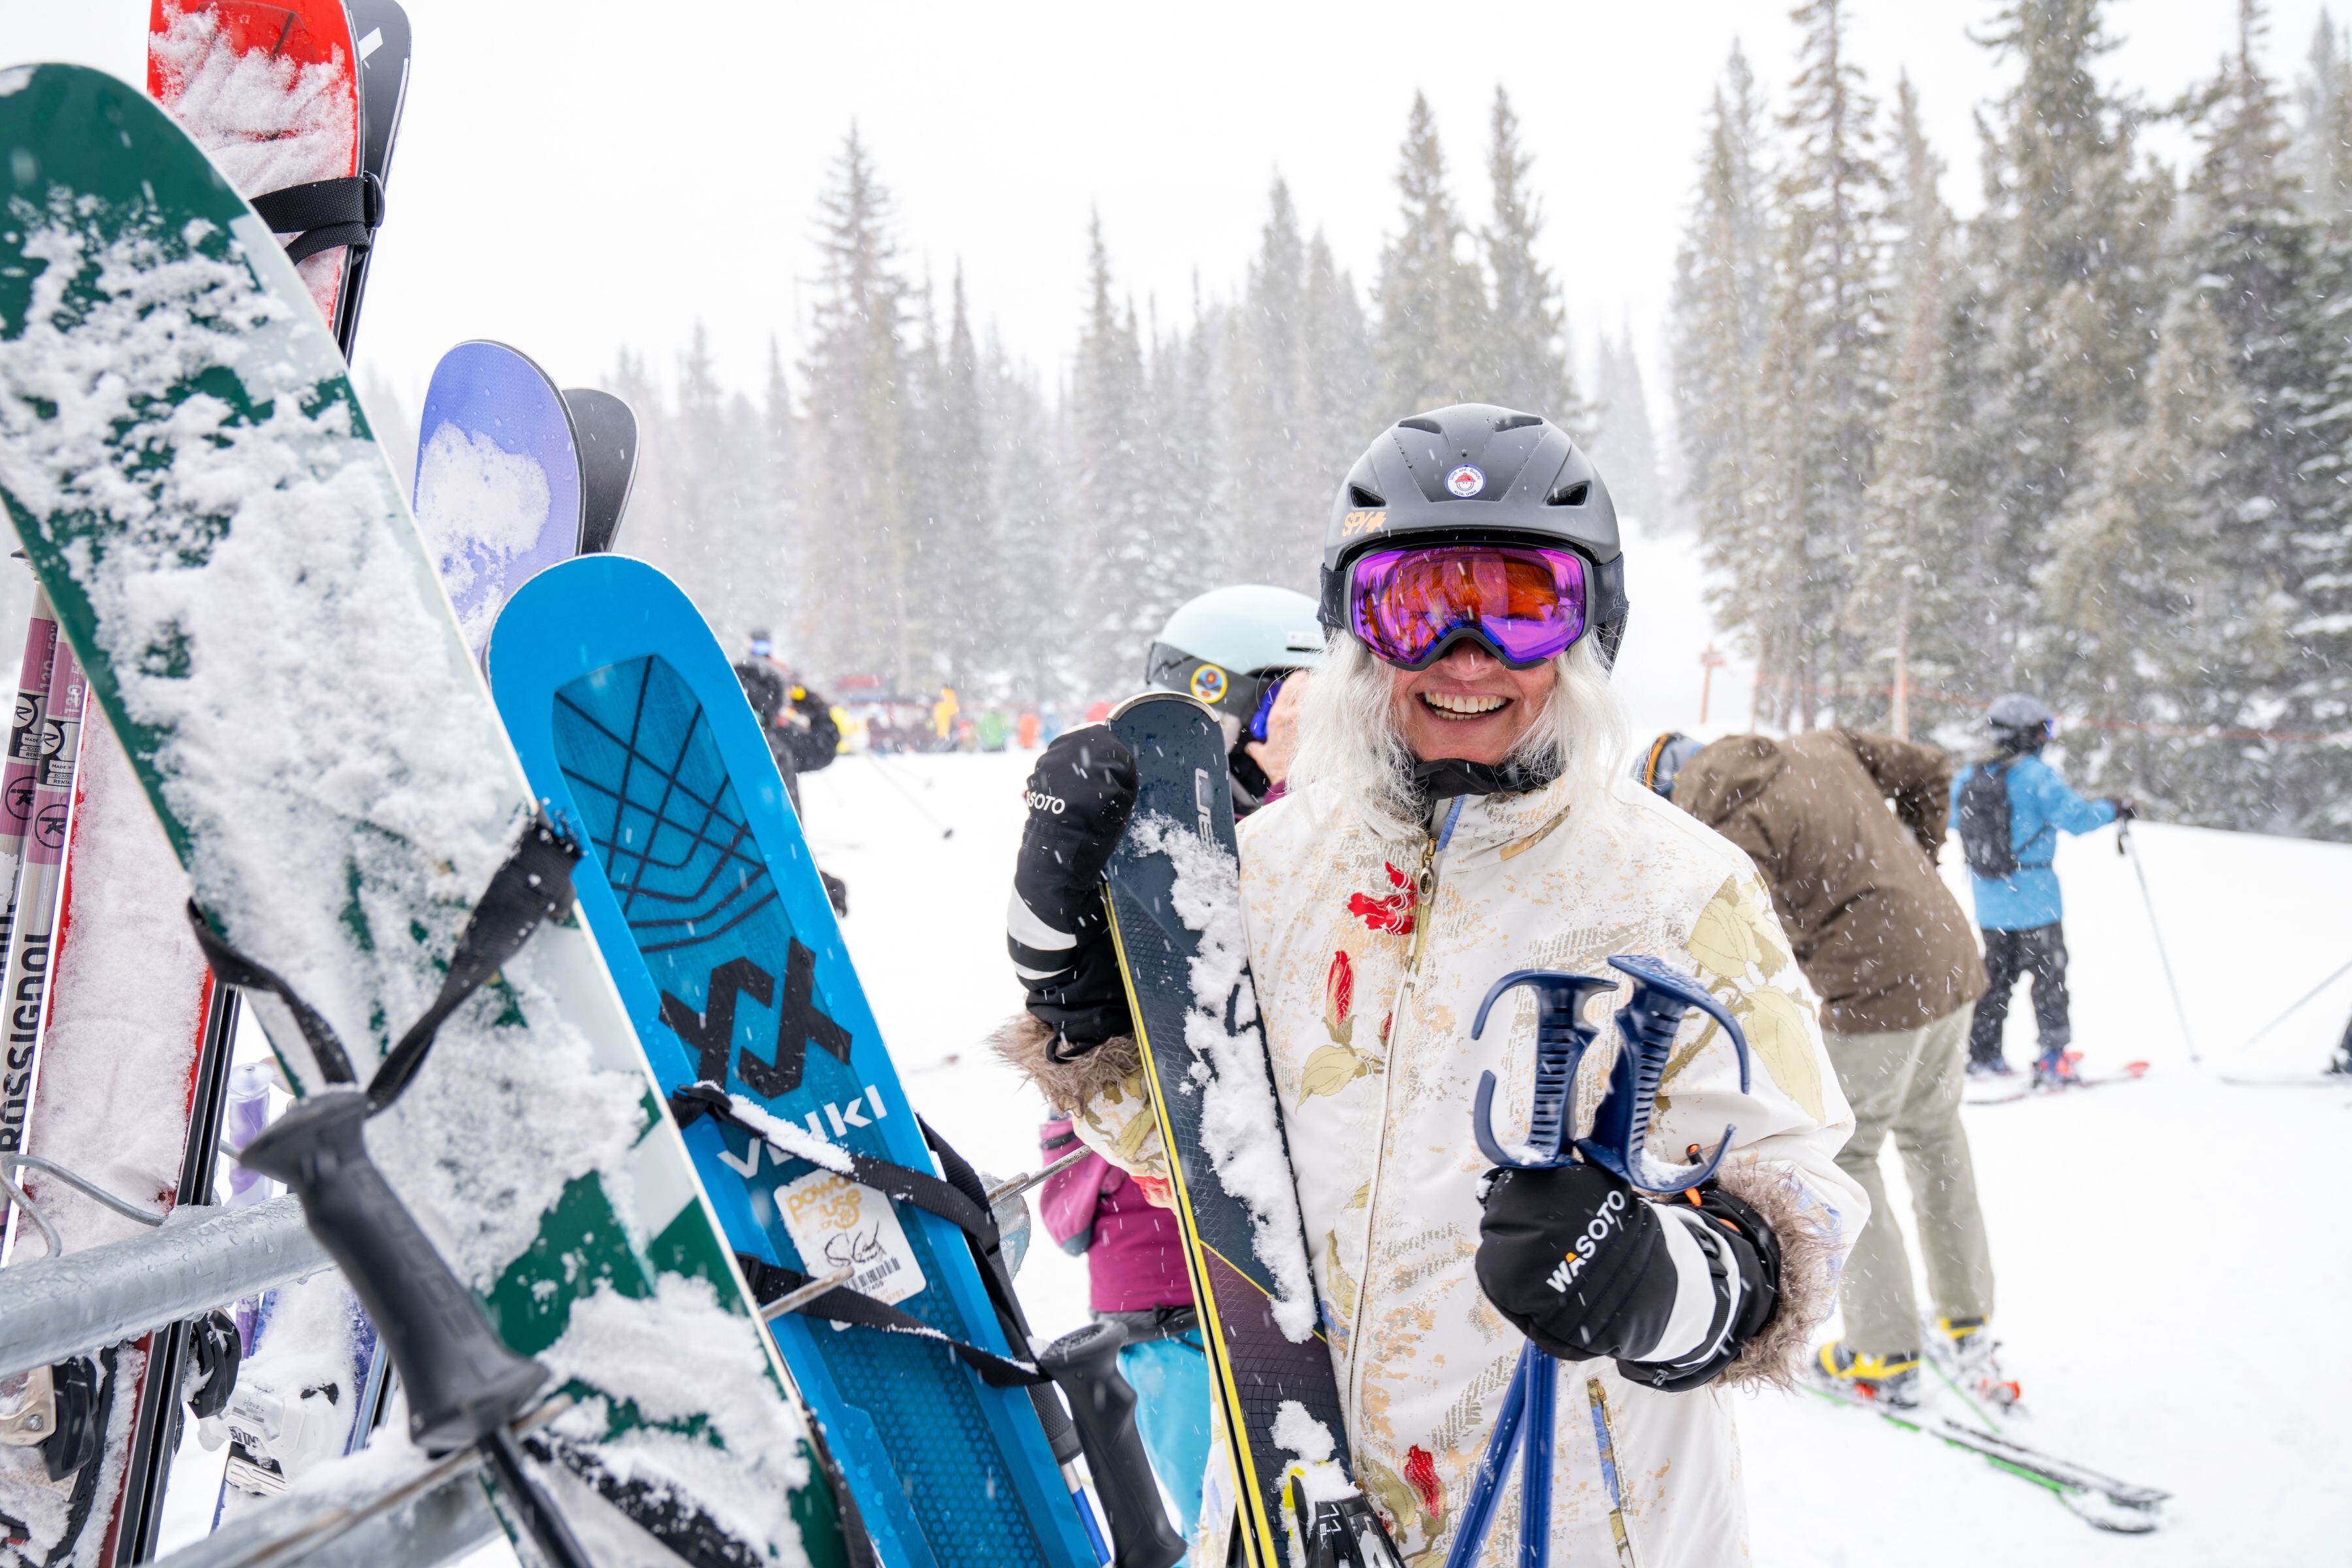 Wild old Bunch member Becky Hammond, 61, the wife of 82-year-old member Matt Kindred, at the Alta Ski Area, in Alta, Utah, March 13, 2024. The Wild old Bunch (who meaningfully chose to lowercase “old” in the club’s name), which started in 1973 and boasts around 115 members, has 80- and 90-year-olds that still ski. (Kate Russell/The New York Times)